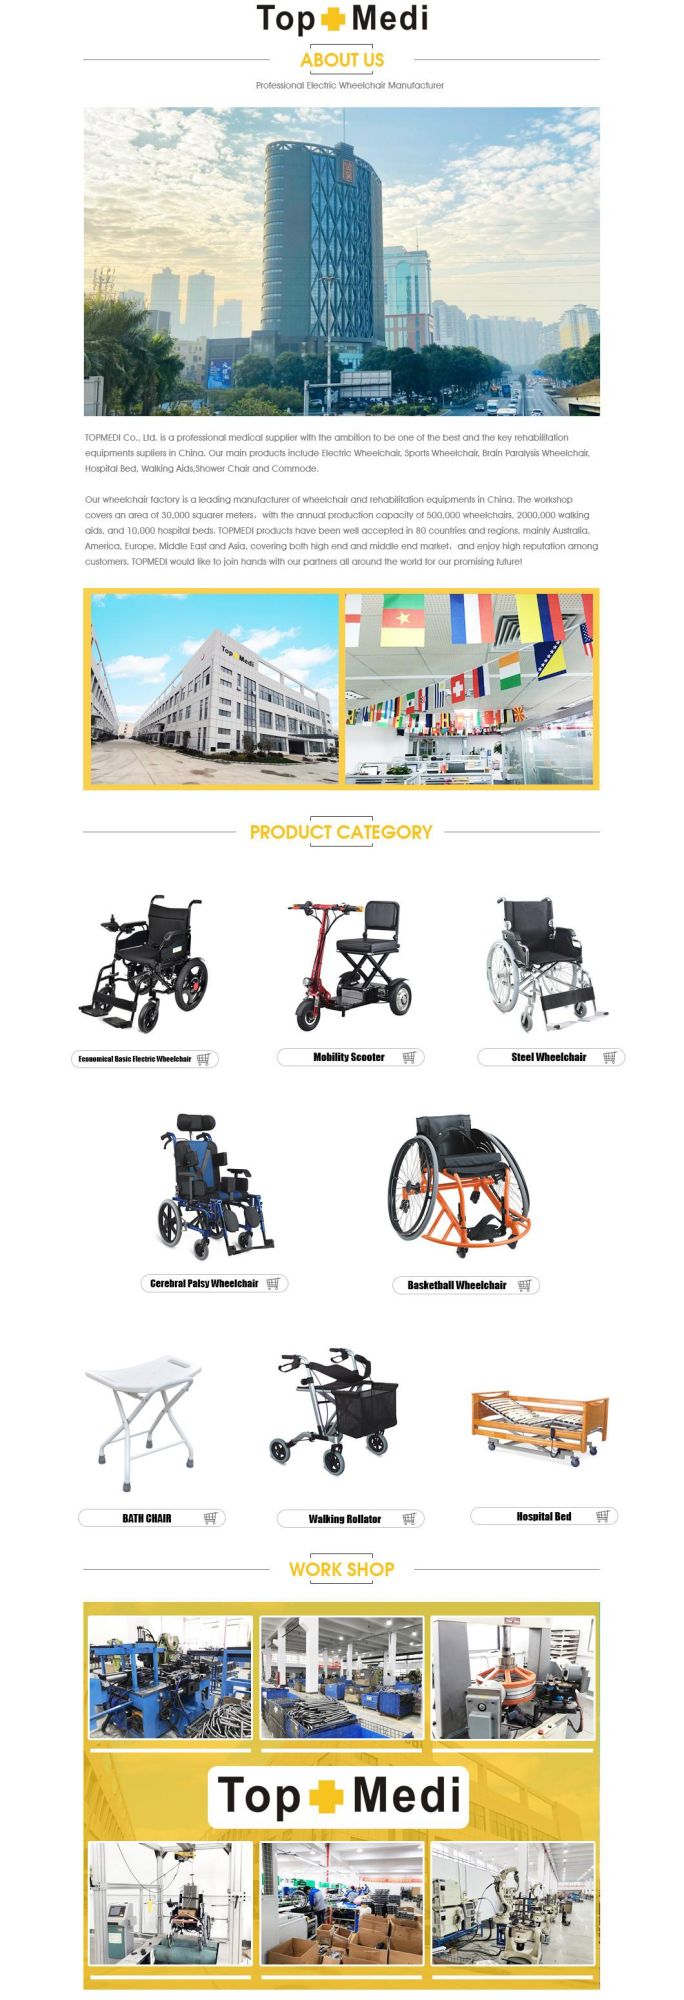 Wholesale Manual Aluminum Wheelchair with Flip-up and Height Adjustable Armrest